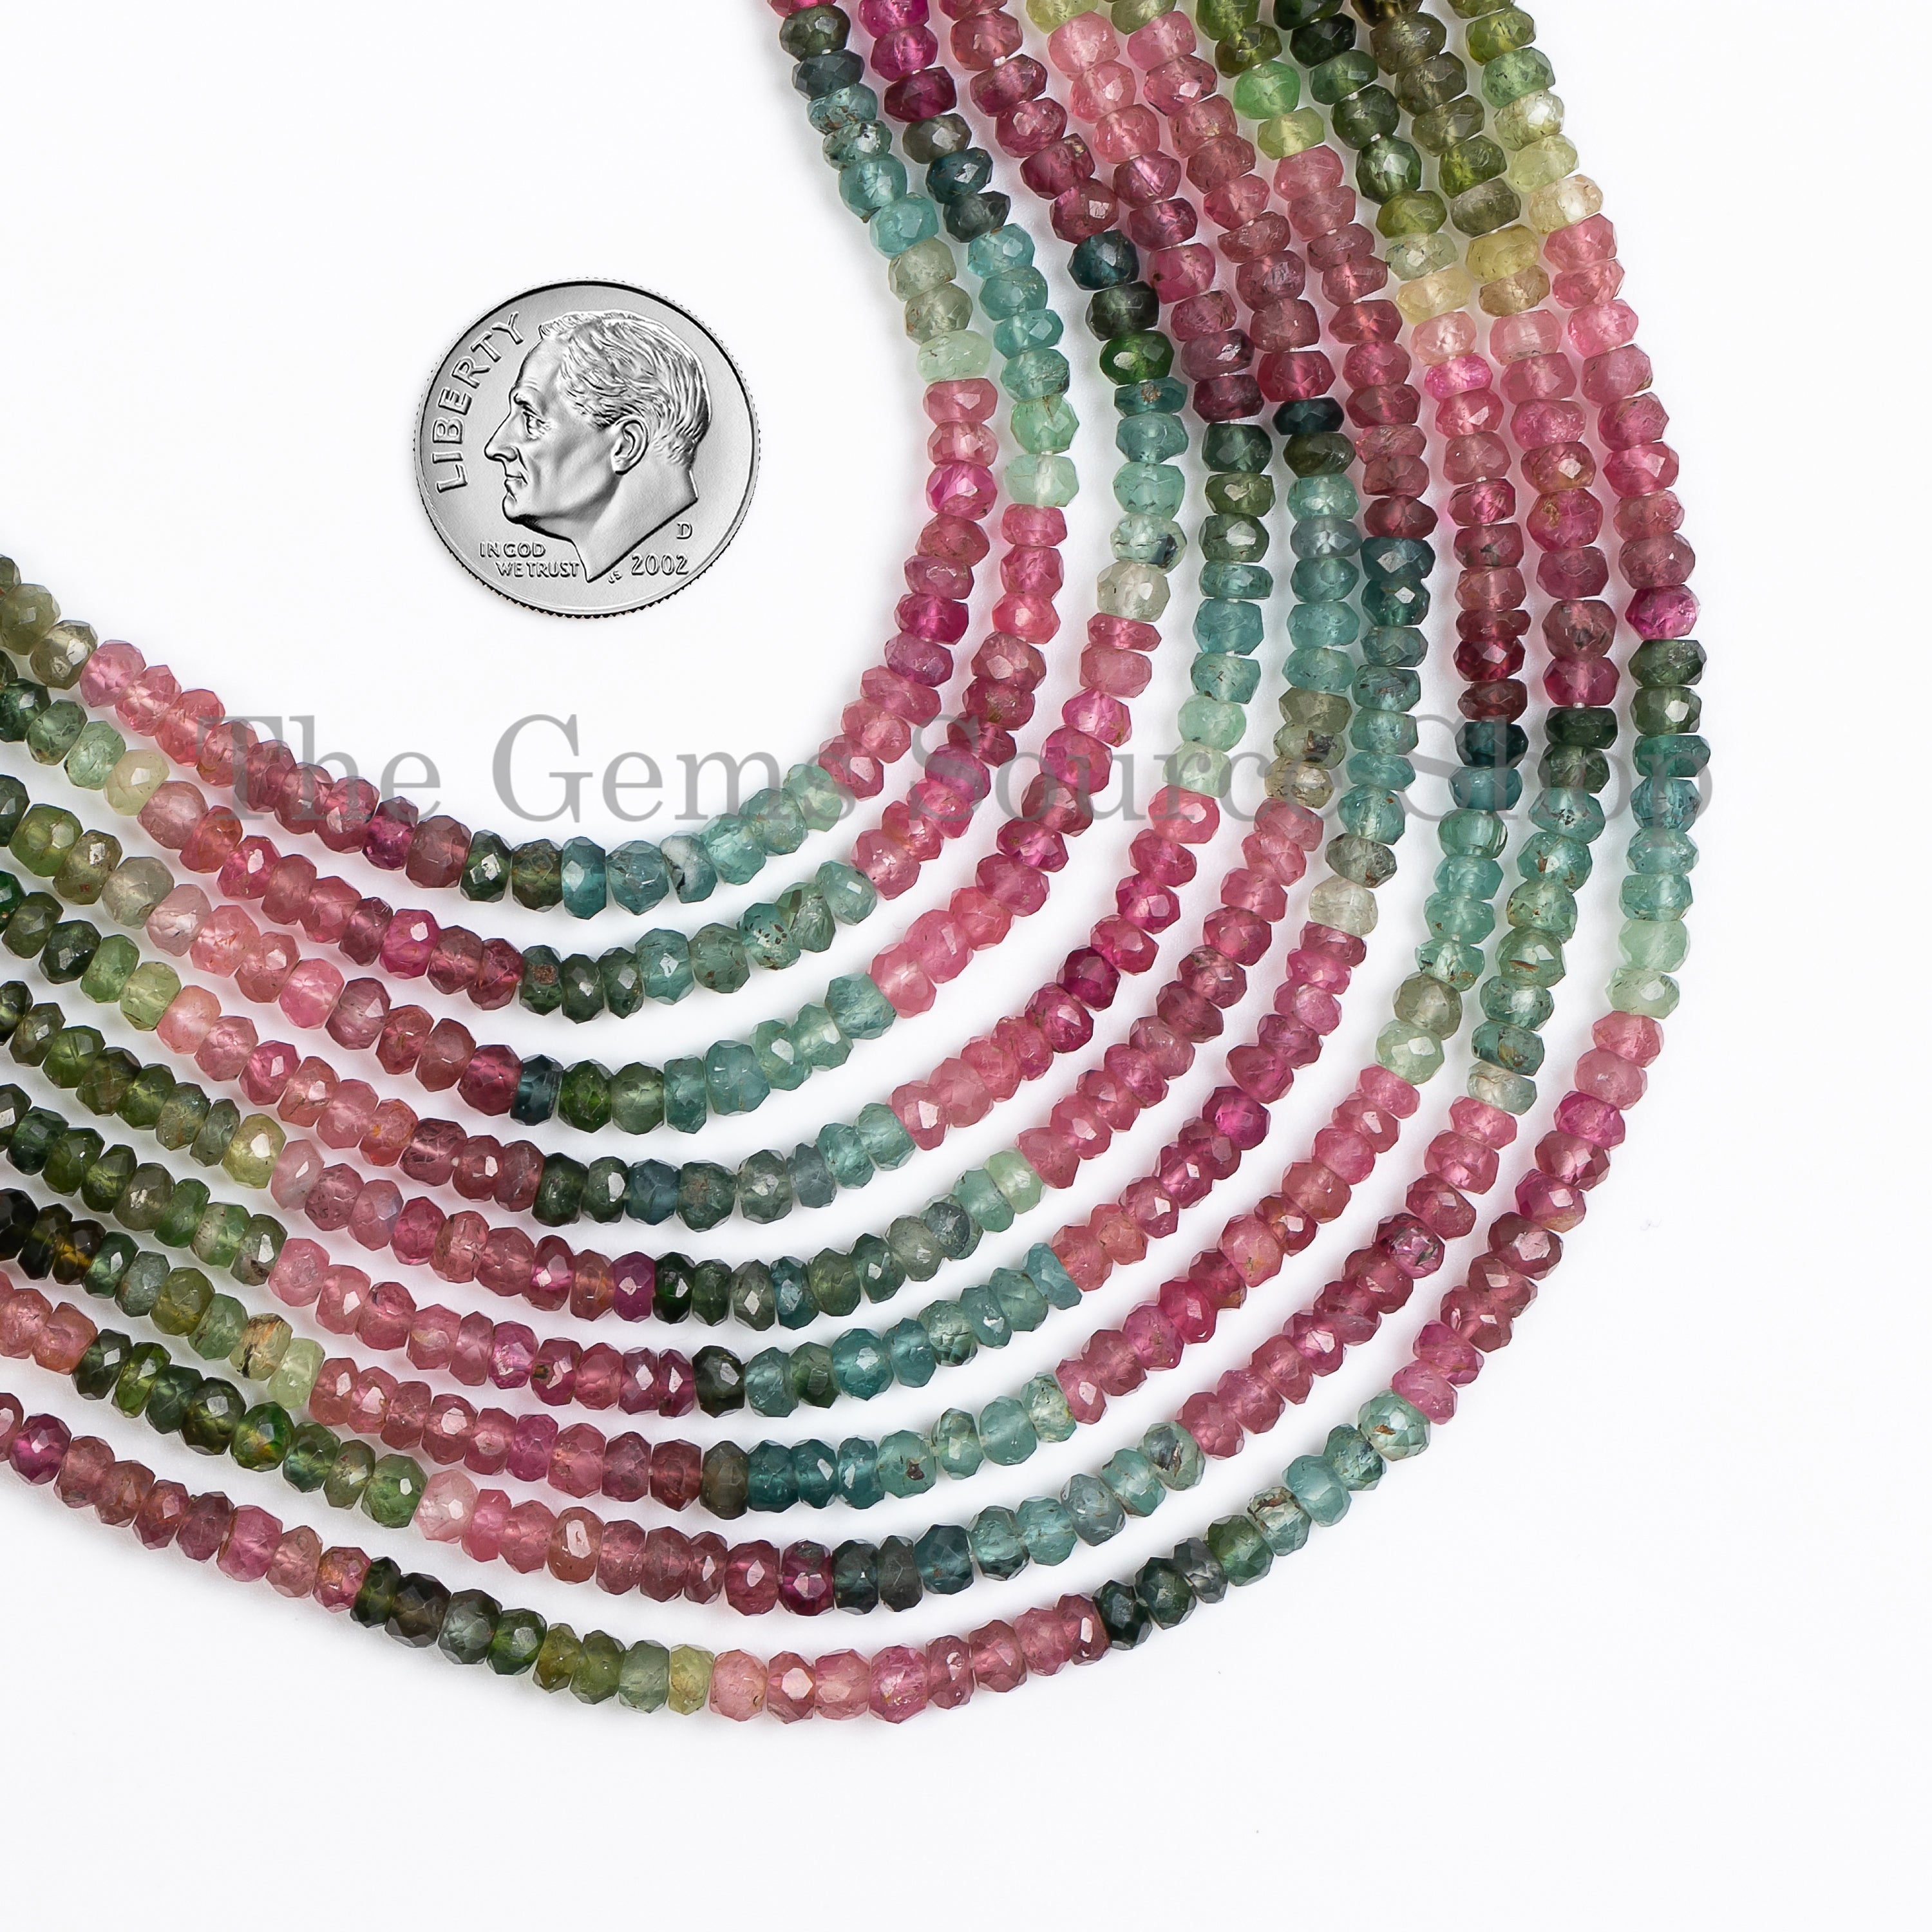 4 mm Multi Tourmaline Beads, Faceted Rondelle Beads, Natural Tourmaline Beads For Jewelry TGS-5040